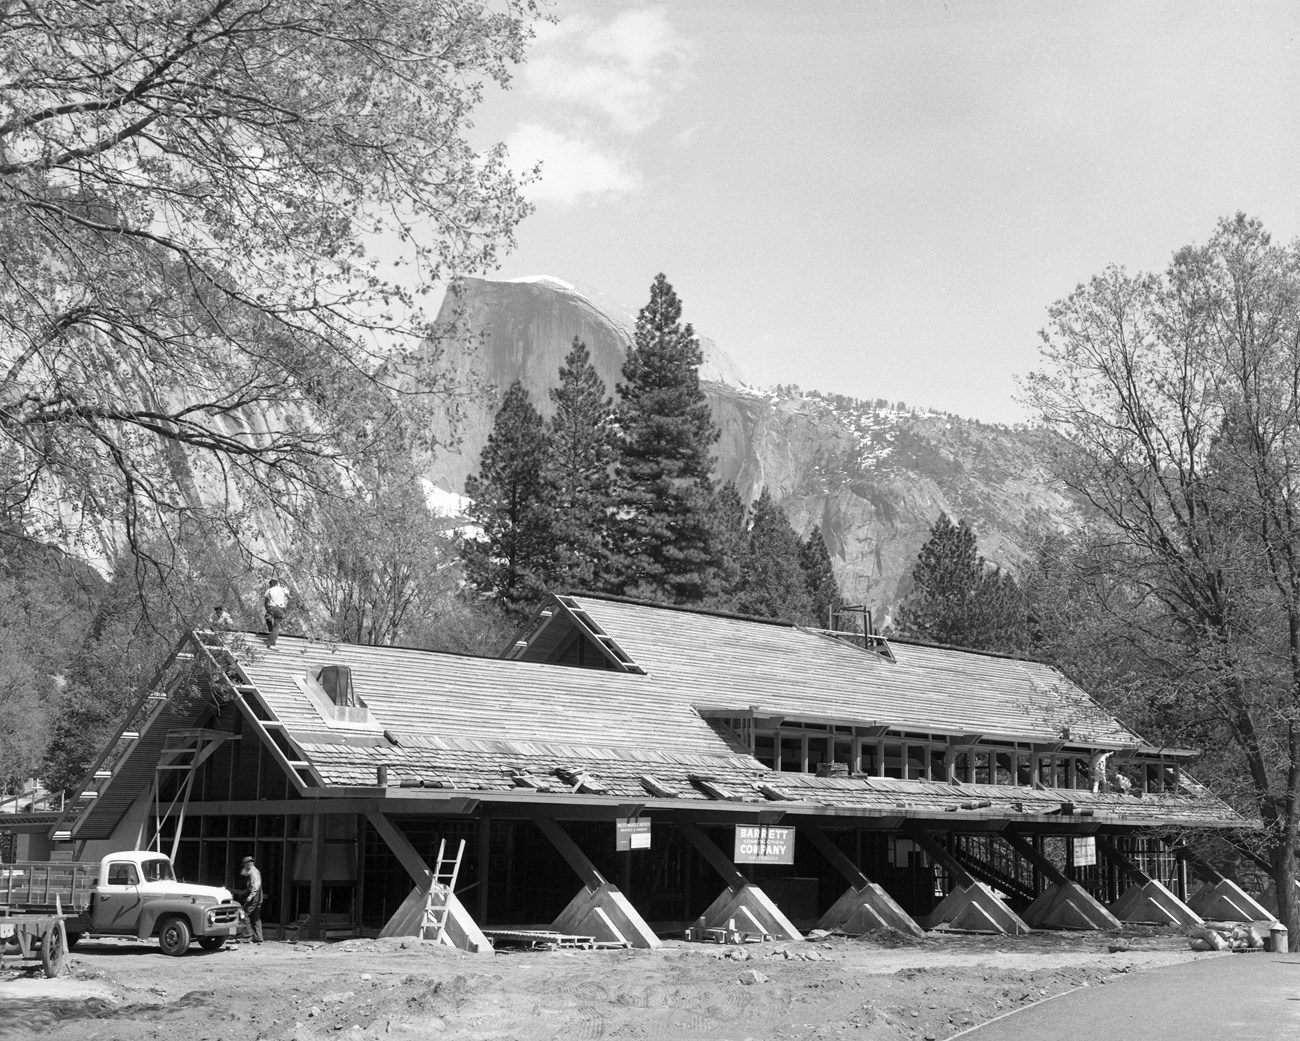 A-frame building under construction; ladders and a work truck are nearby, Half Dome is in the background